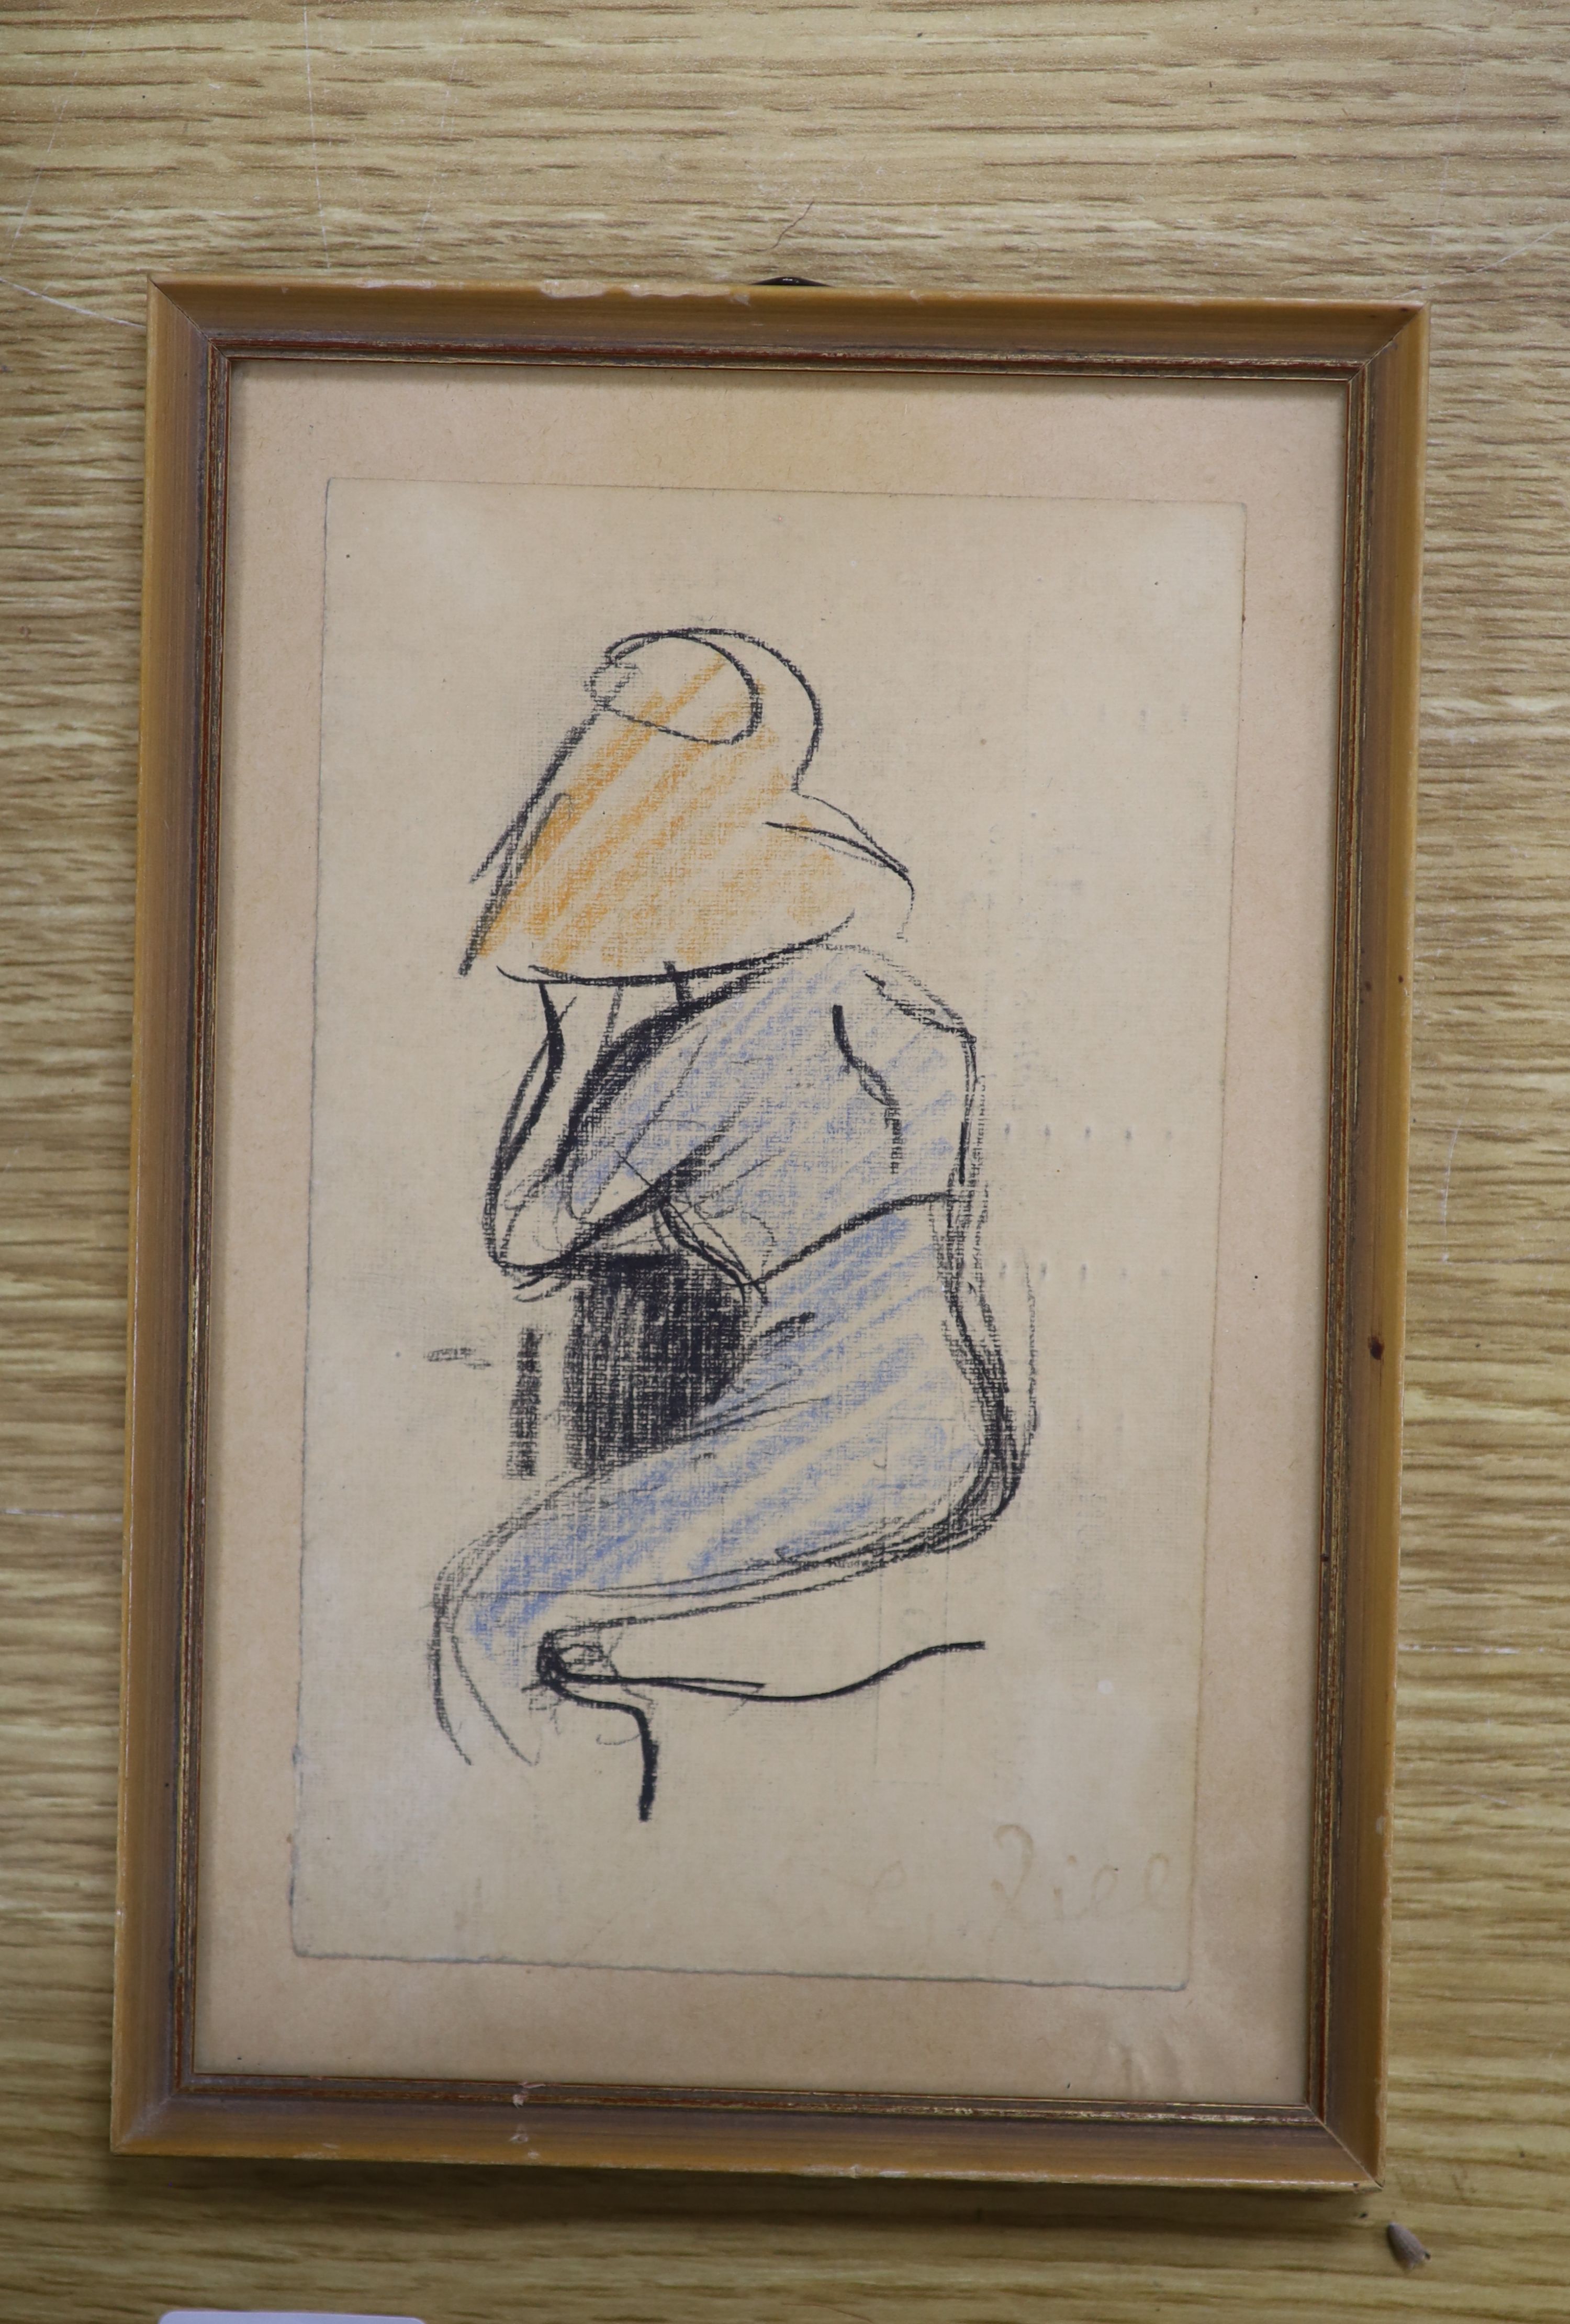 C. Gill?, coloured chalk on paper, Study of a woman wearing an orange hat, 16 x 10cm